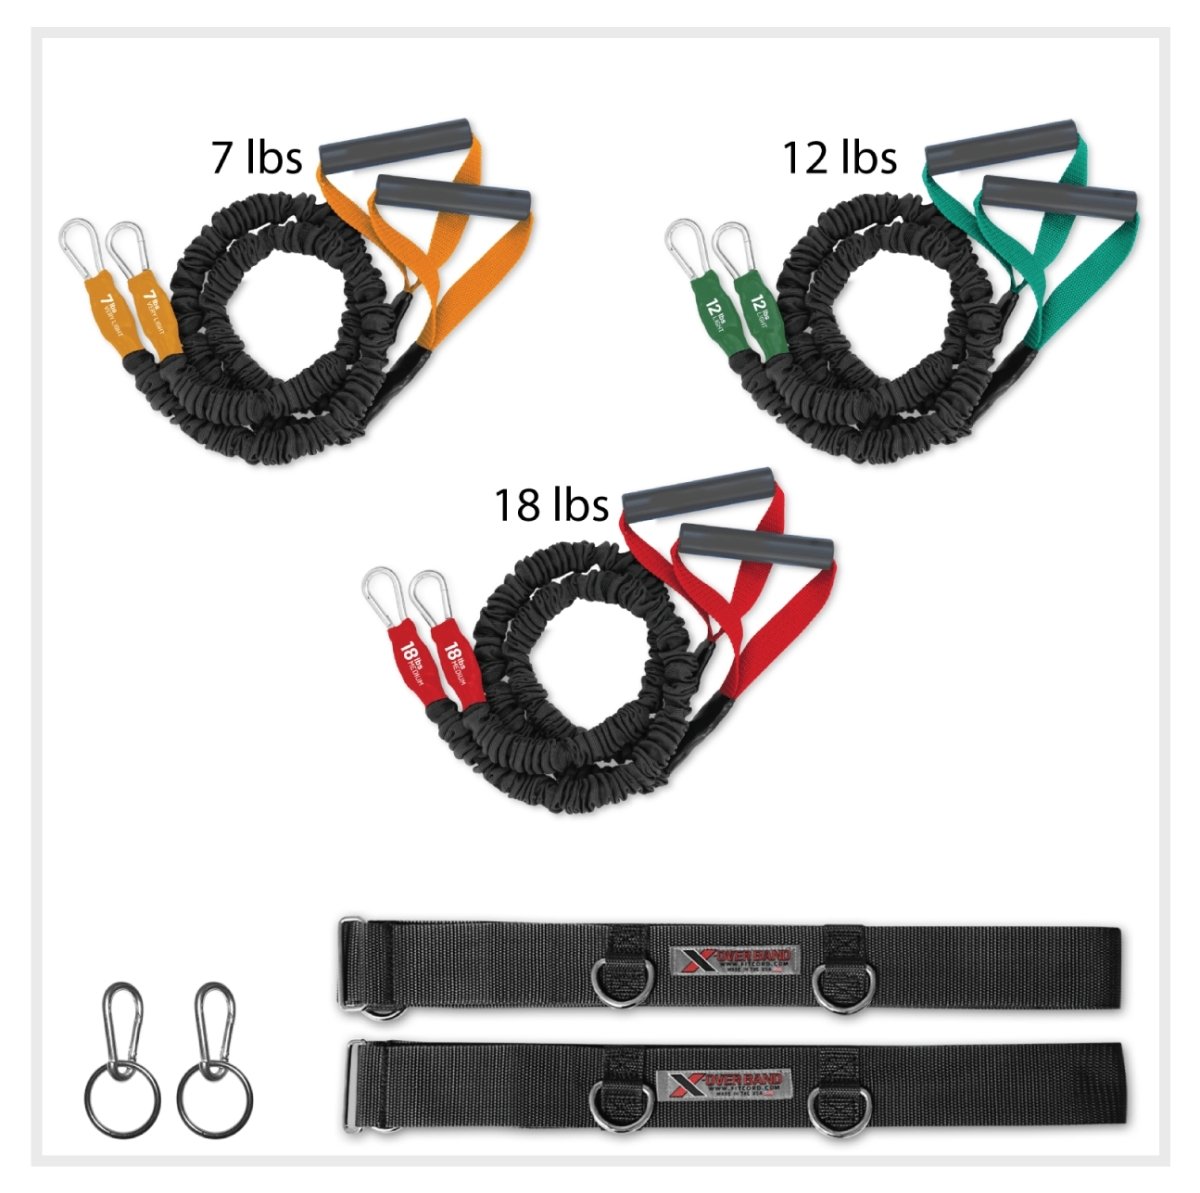 X-Over Cable Crossover Cord Home Gym Bundle- Intermediate 1 best resistance bands made in USA and covered for safety - FitCord Resistance Bands